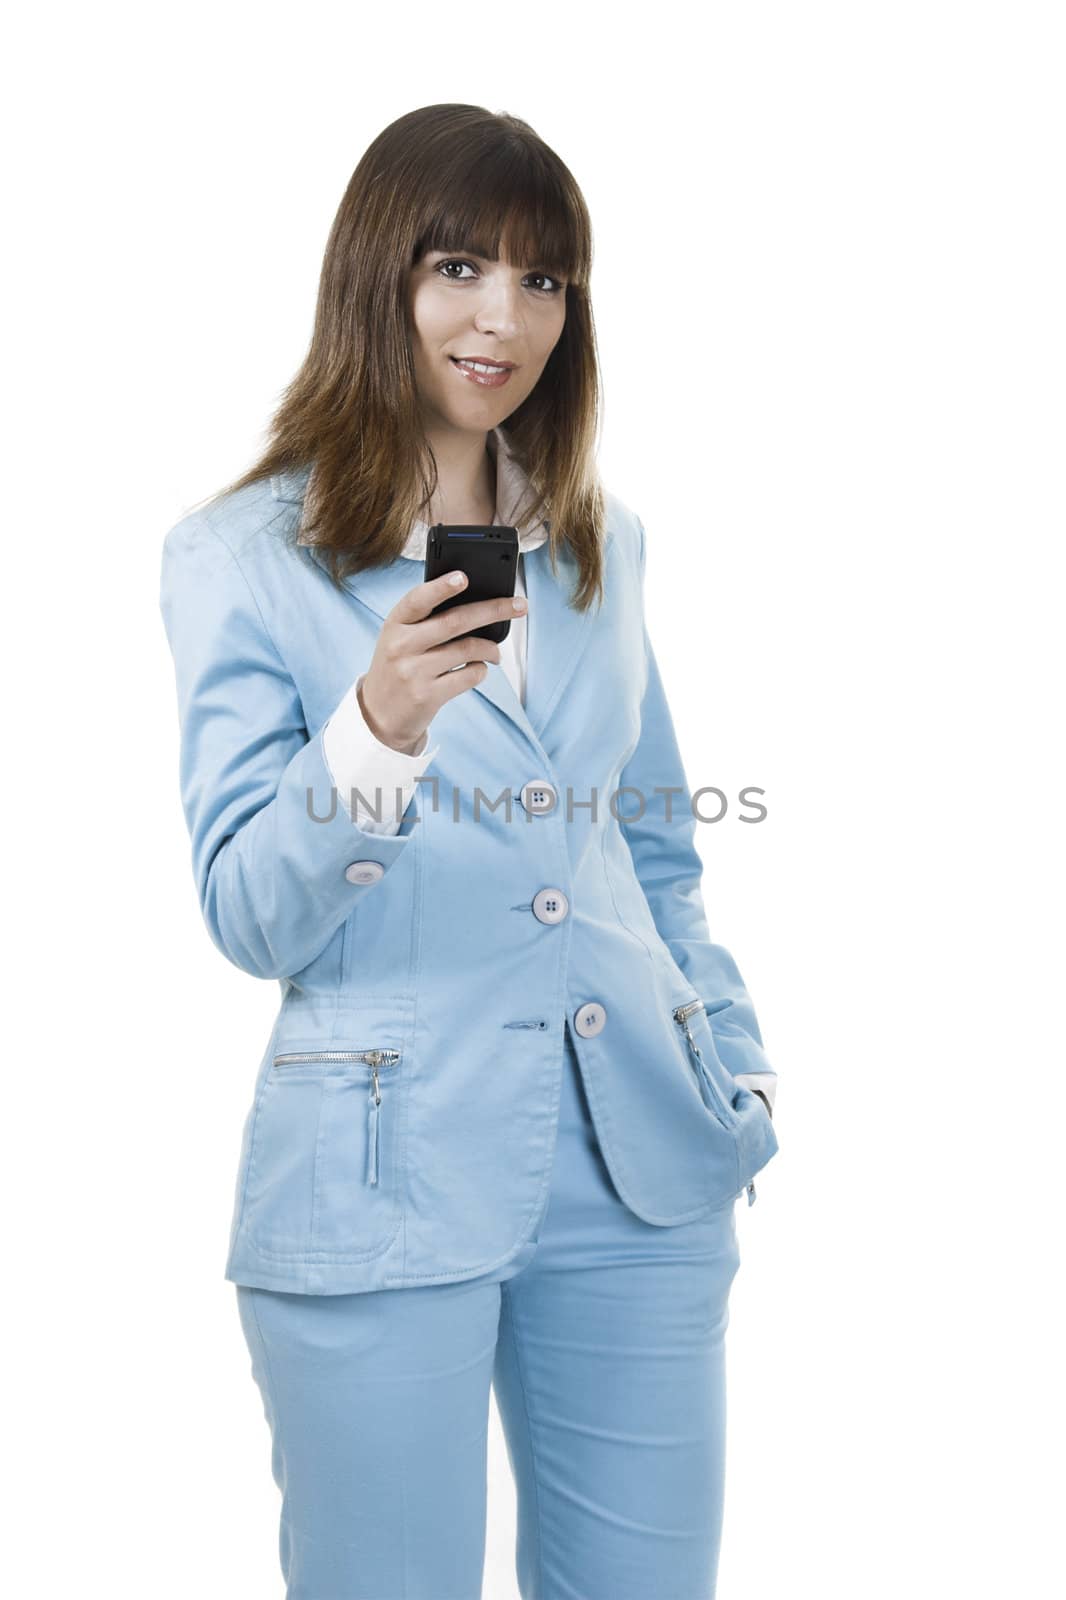 Beautiful businesswoman holding a PDA over a white background

